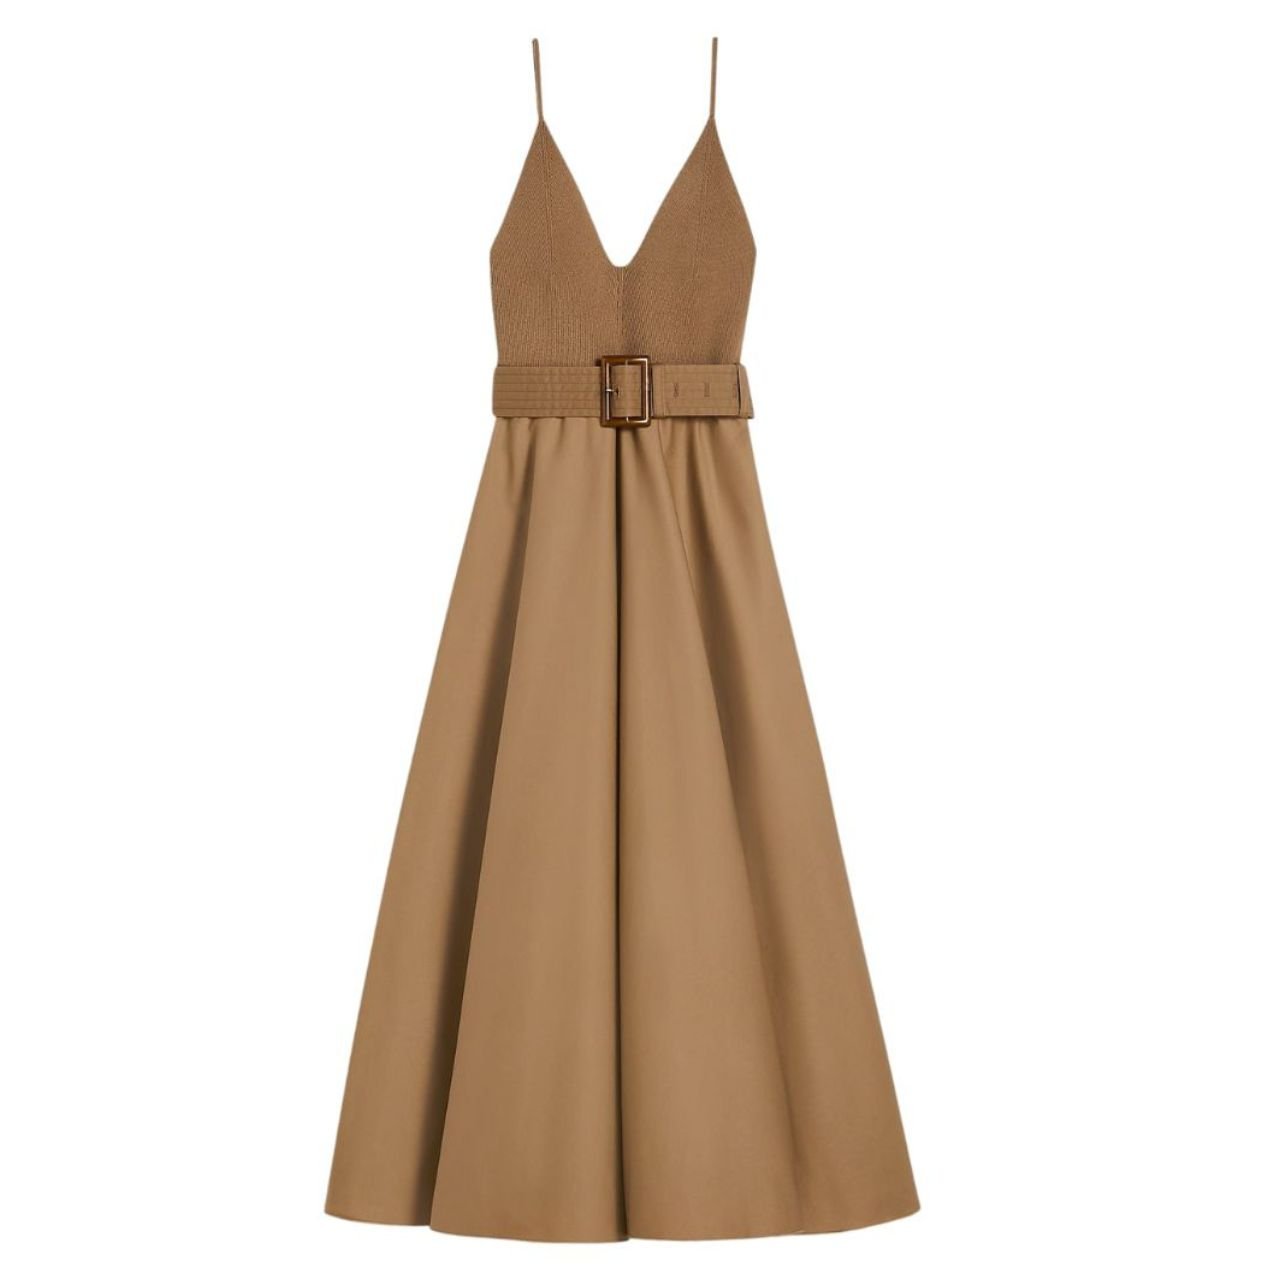 Scanlan Theodore camel crepe knit camisole cotton dress